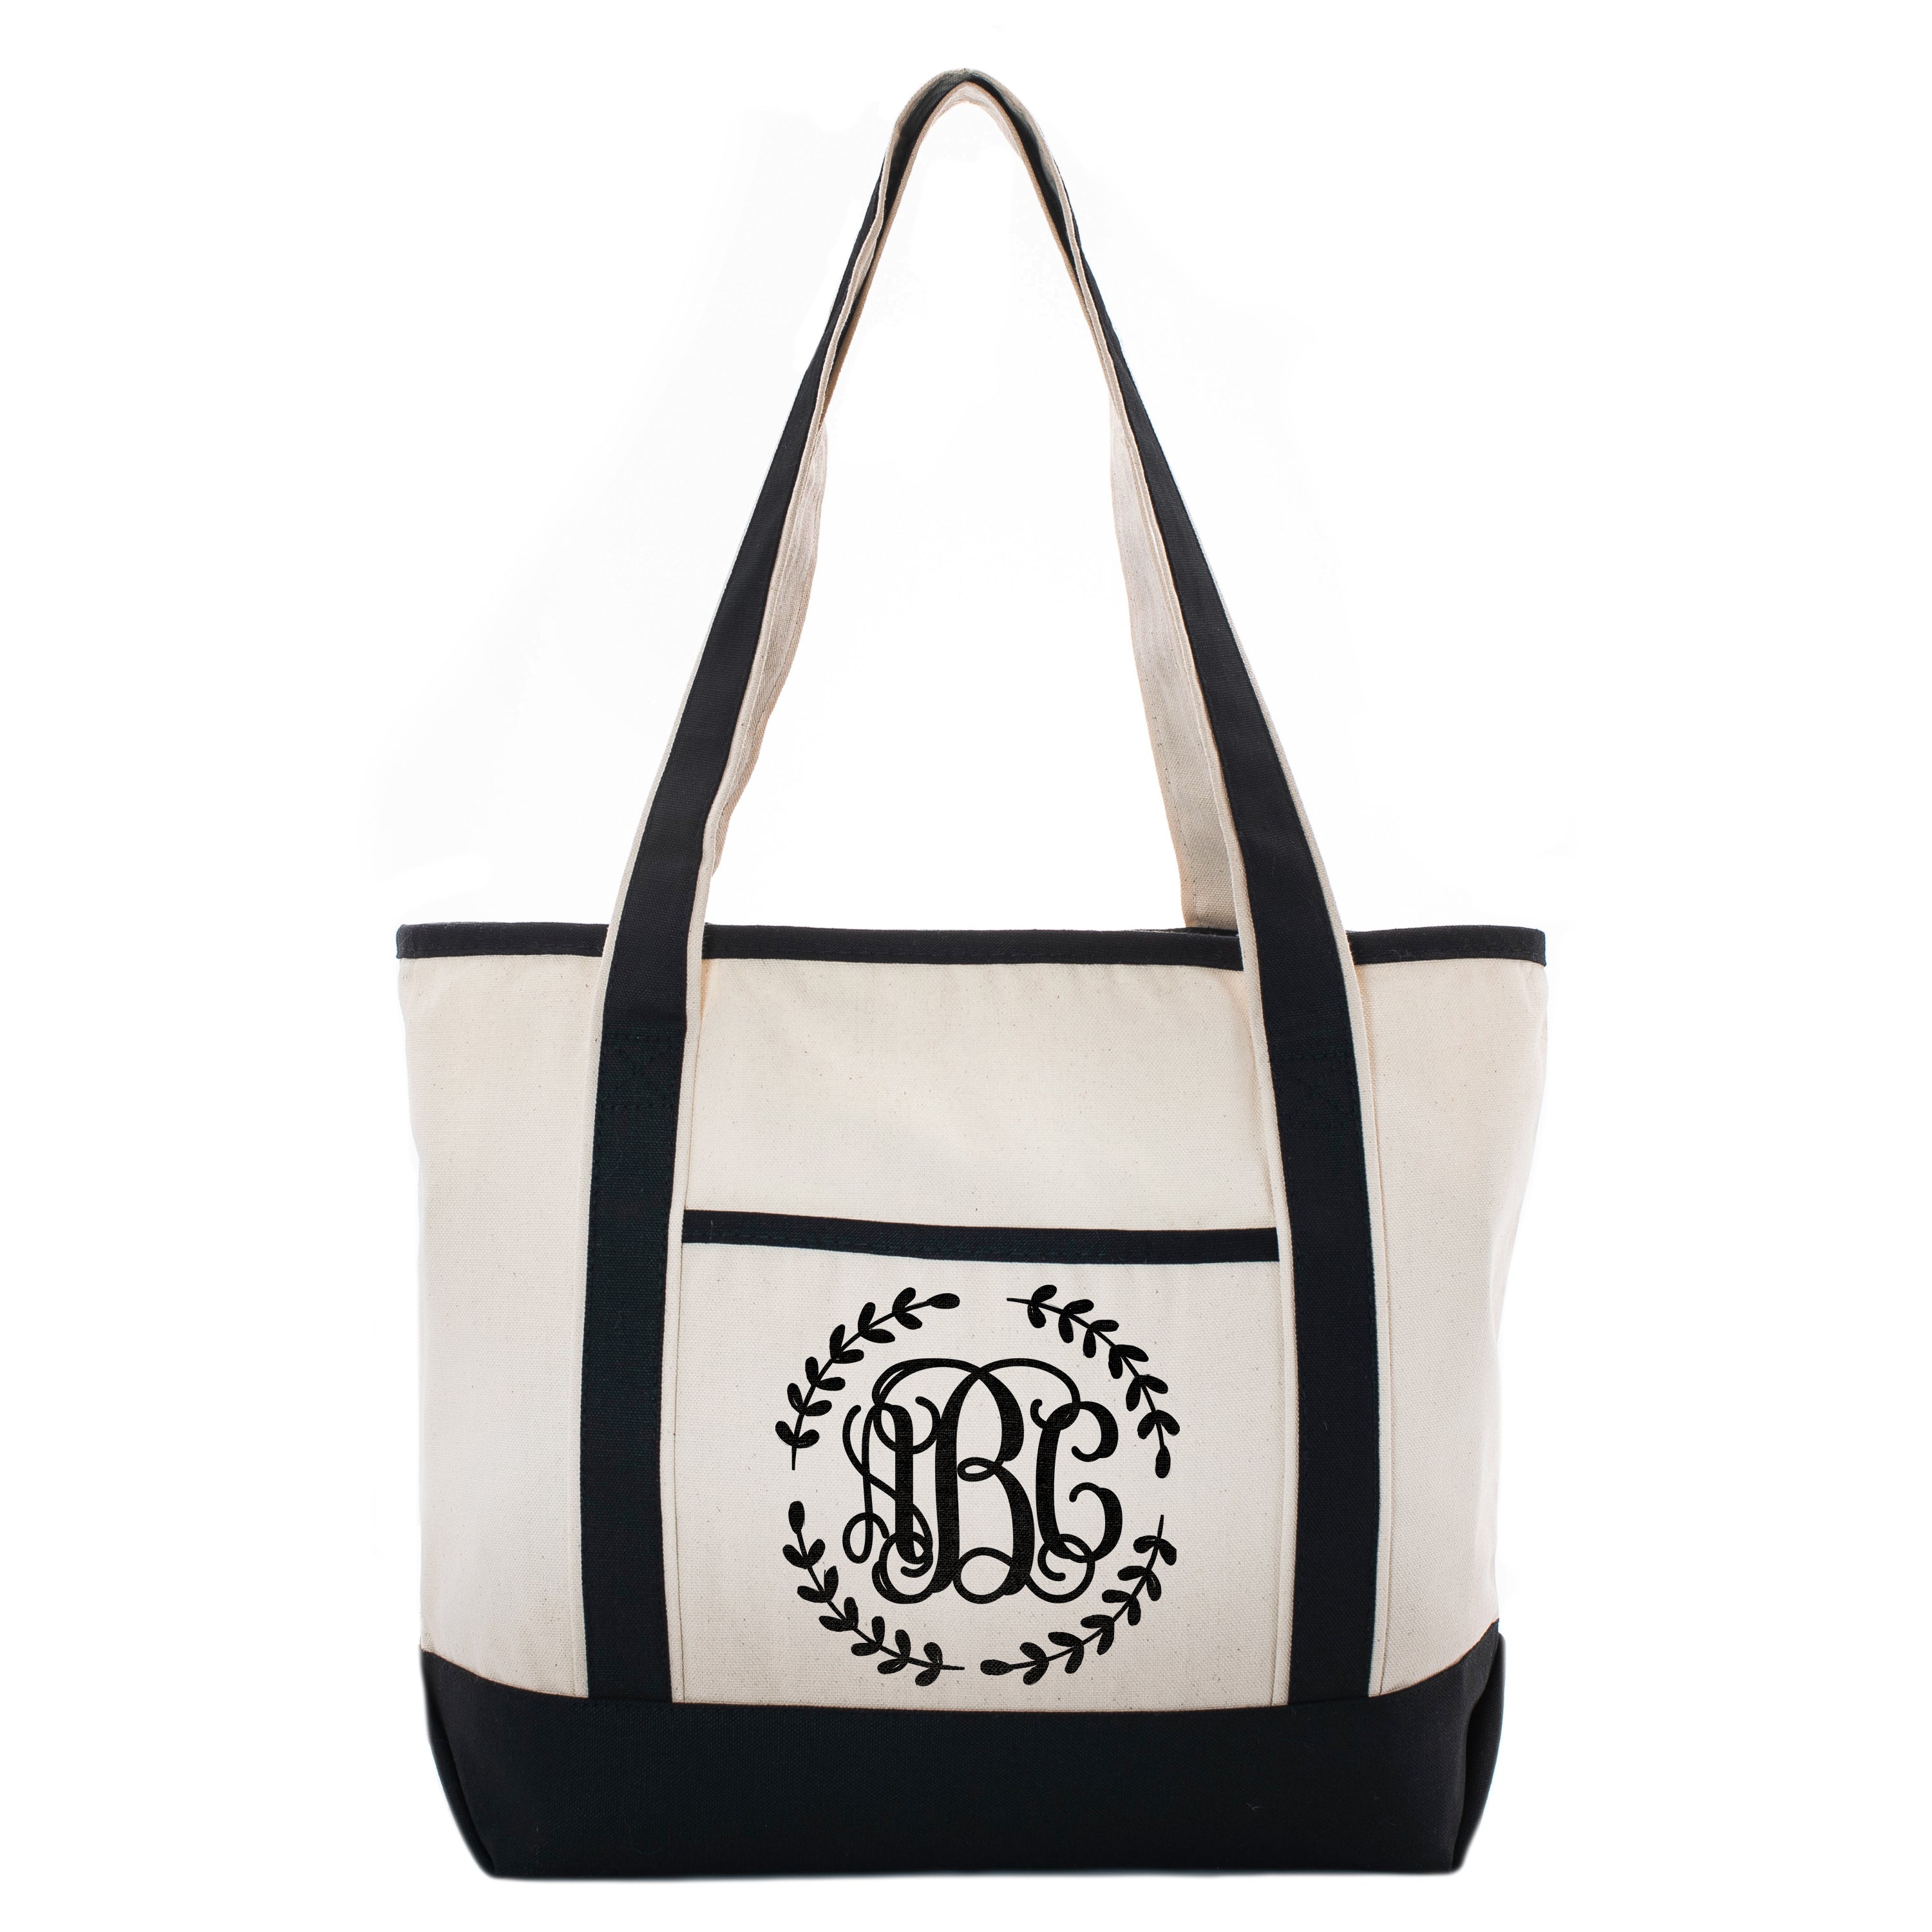 Personalized Monogram Gift Bags